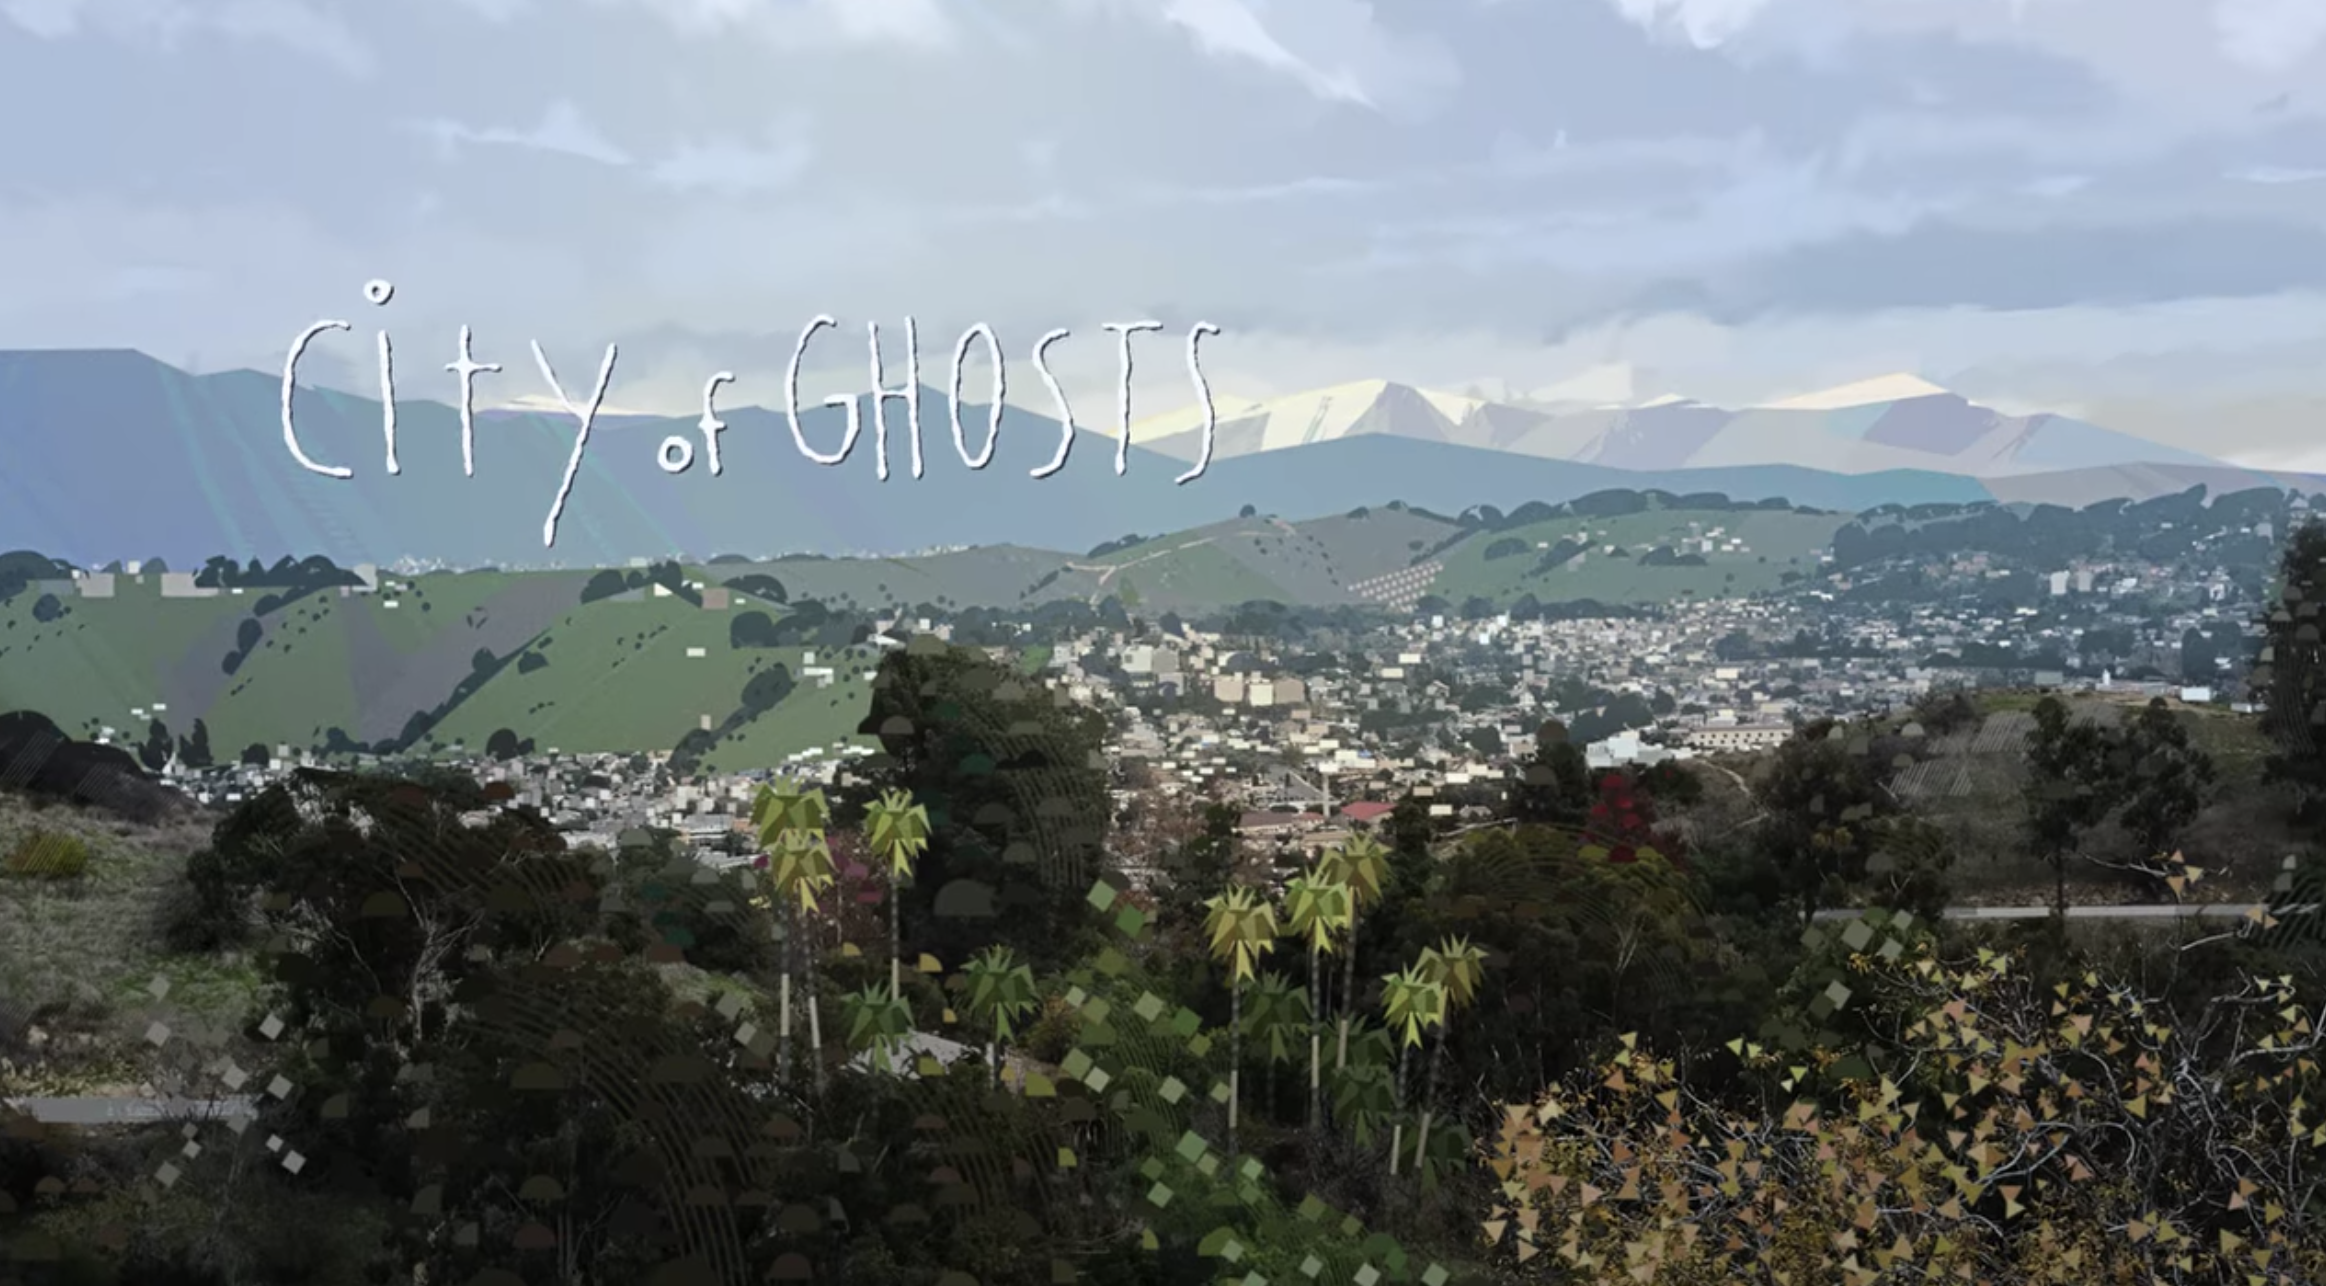 The City of Ghosts title screen